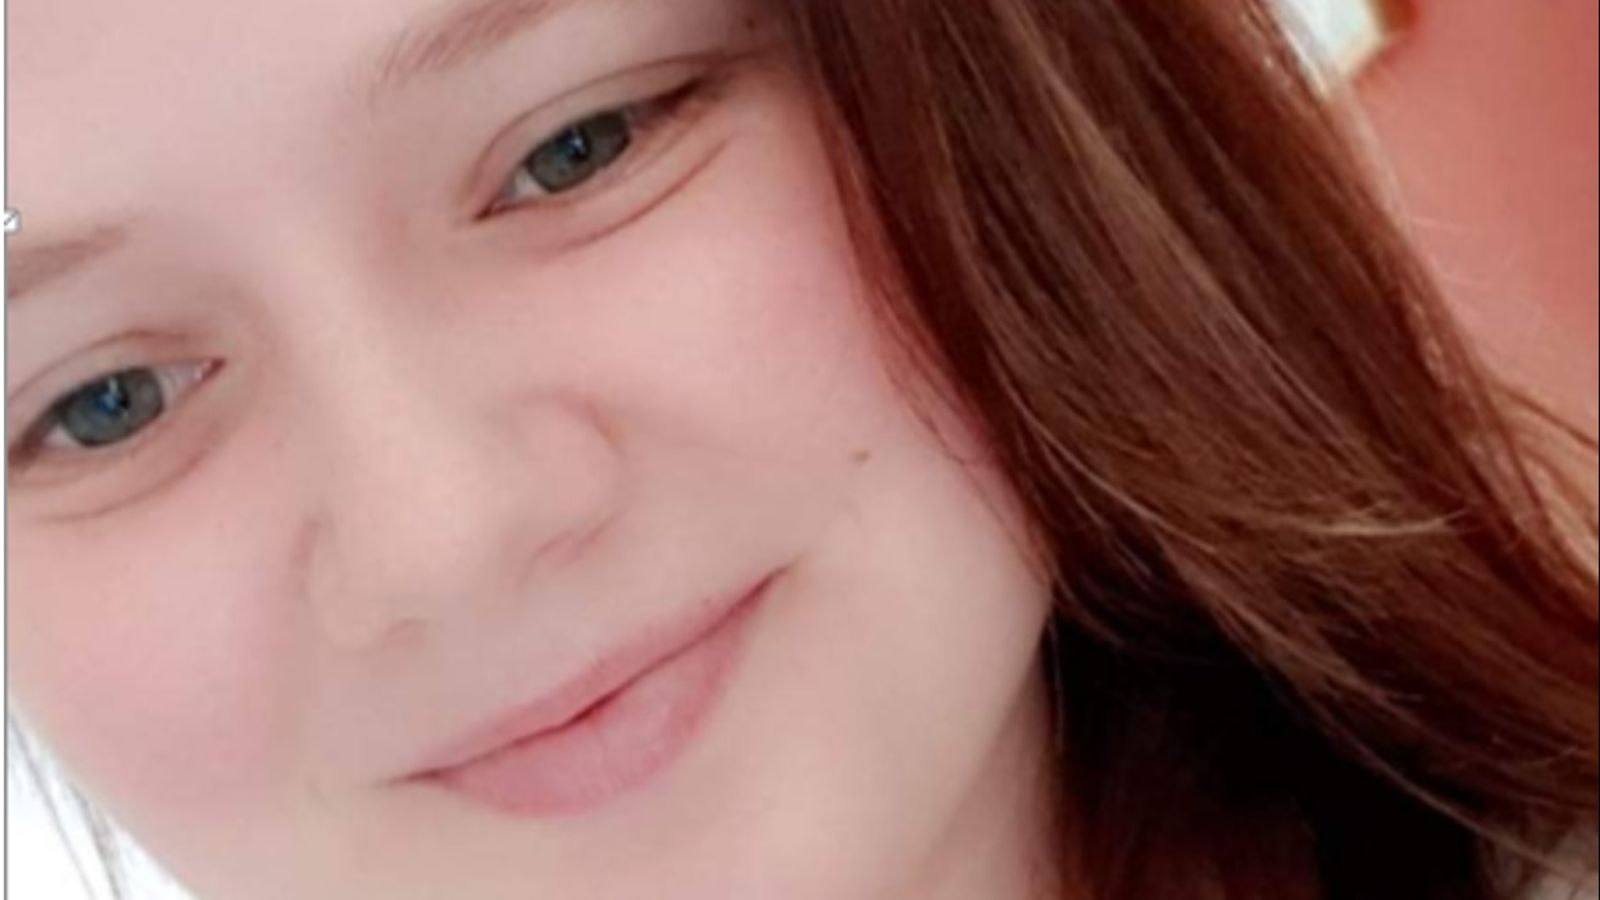 Remains found in house confirmed to be missing teenager Leah Croucher's